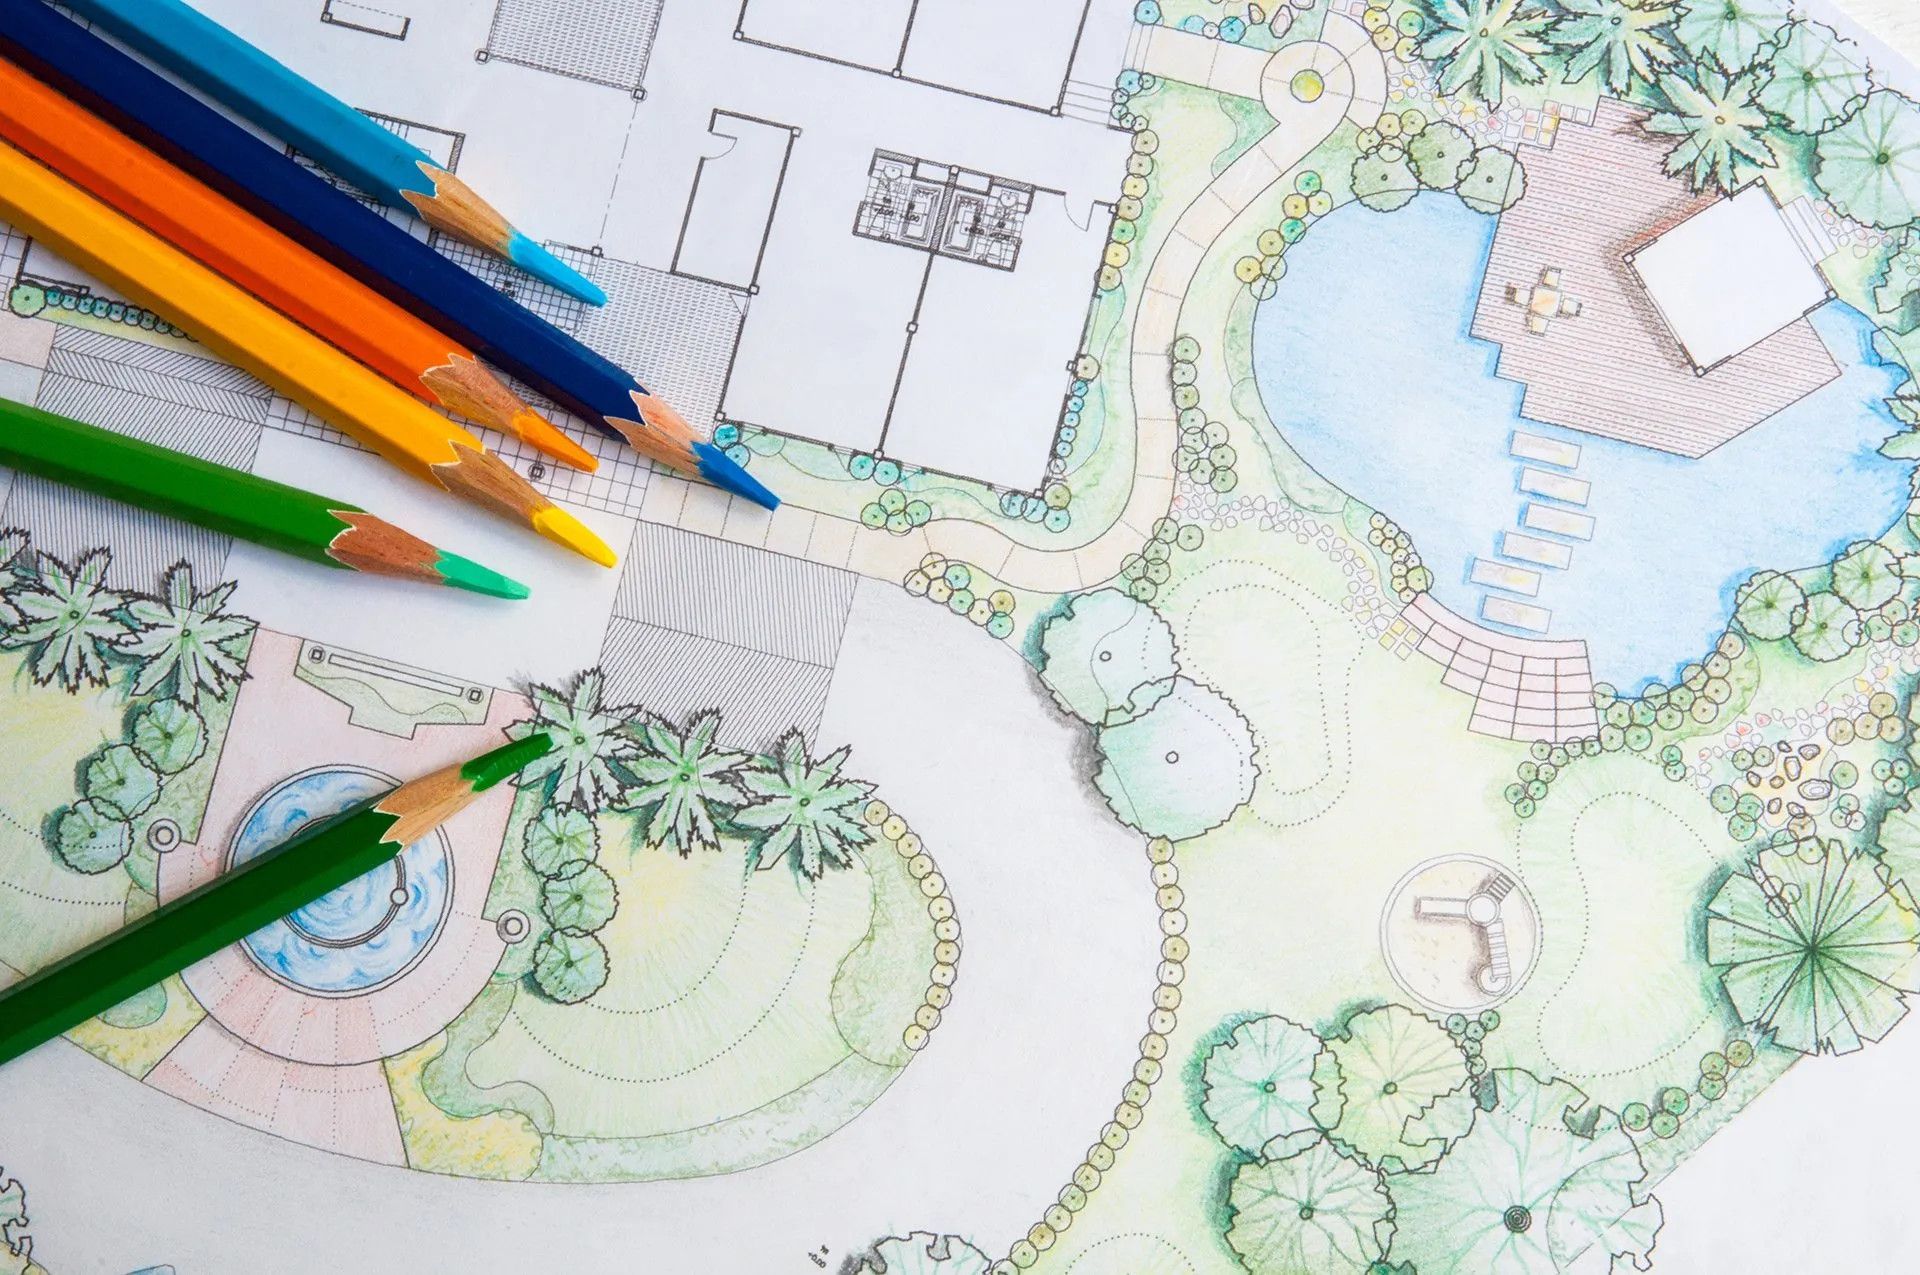 blueprint of landscaping project designed with colored pencils